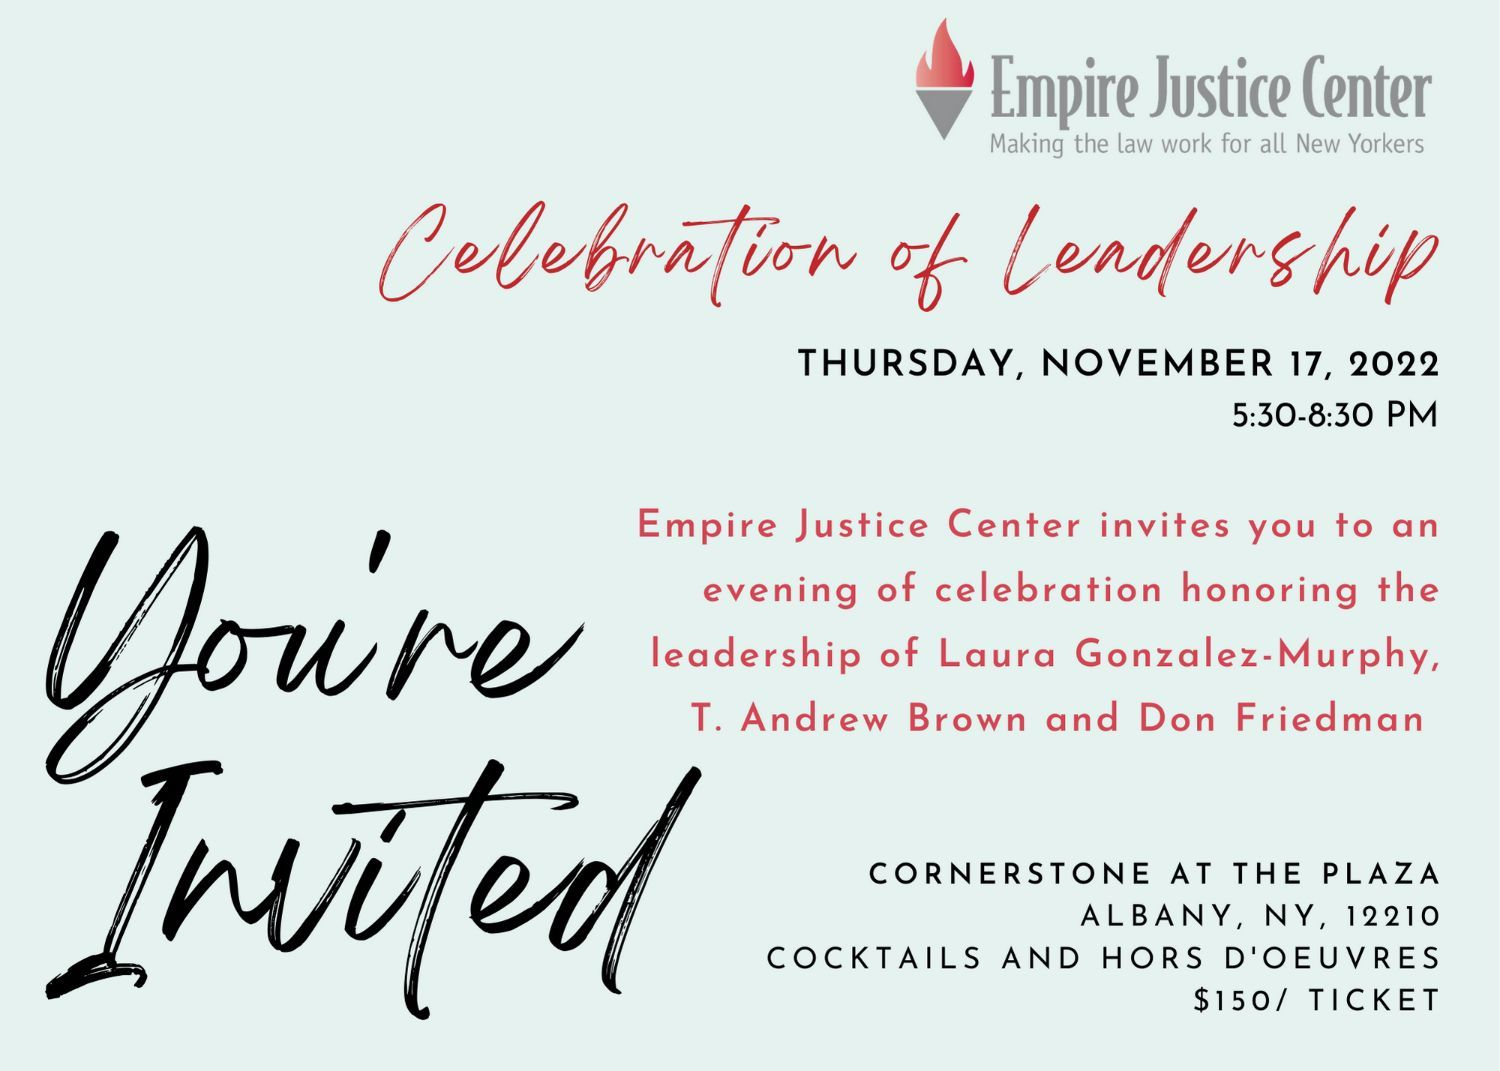 Graphic with information about the Celebration of Leadership event. Thursday, November 17, from 5:30-8:30Cornerstone at the Plaza Albany, NY 12210Cocktails and Hor d'oeurves$150 a ticket